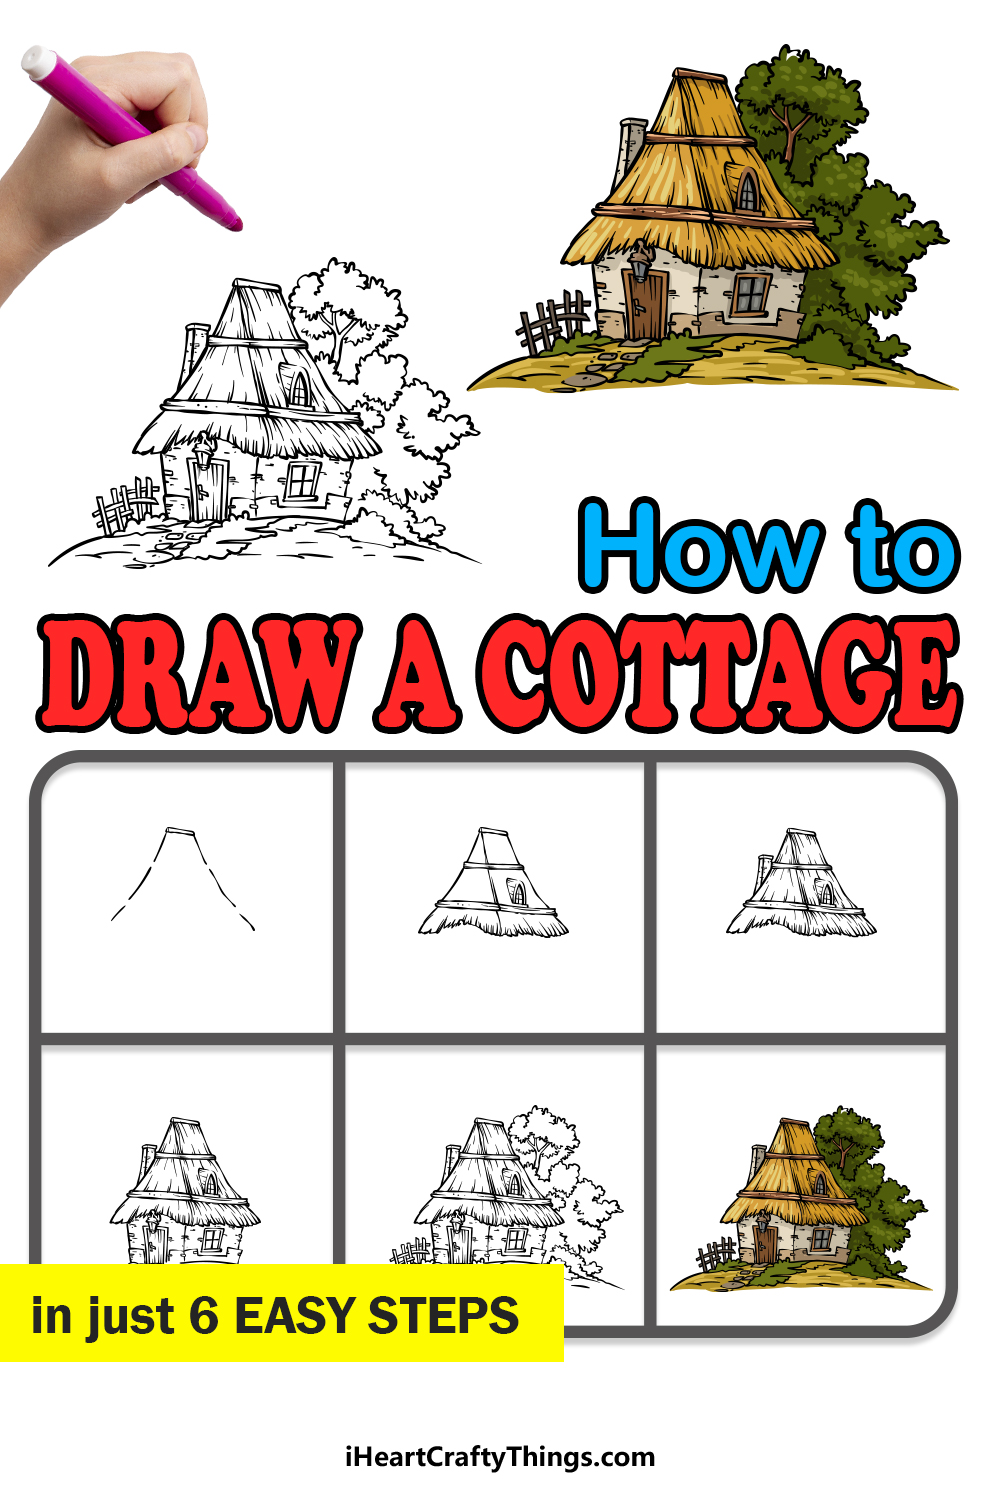 how to draw a Cottage in 6 easy steps